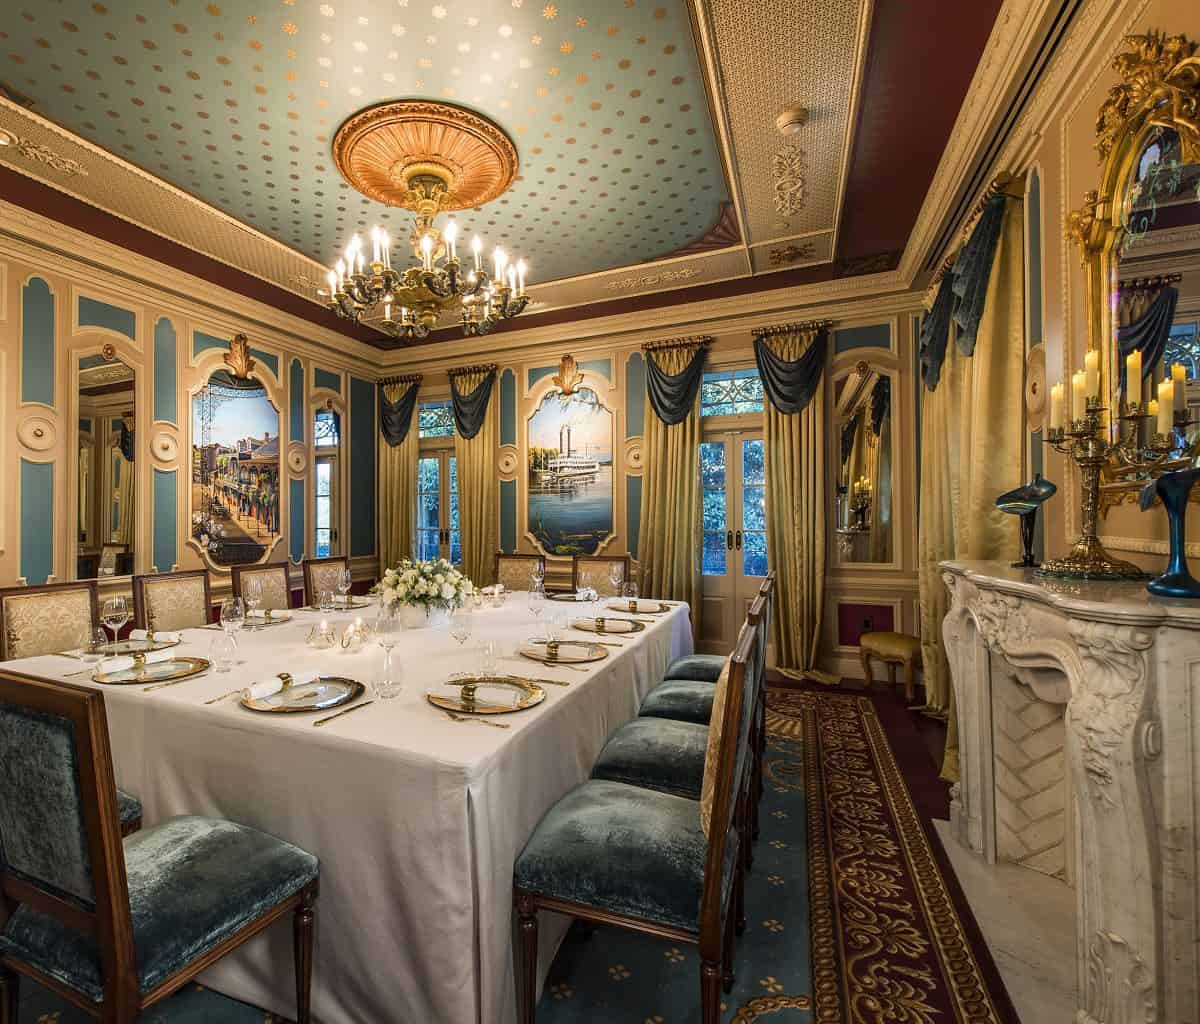 21 Royal is decorated in the Empire style made popular in 19th century New Orleans. At dinnertime, guests take their seats around a lavish table covered in white linens, fresh flowers and set with gold-plated dinnerware and fine crystal.